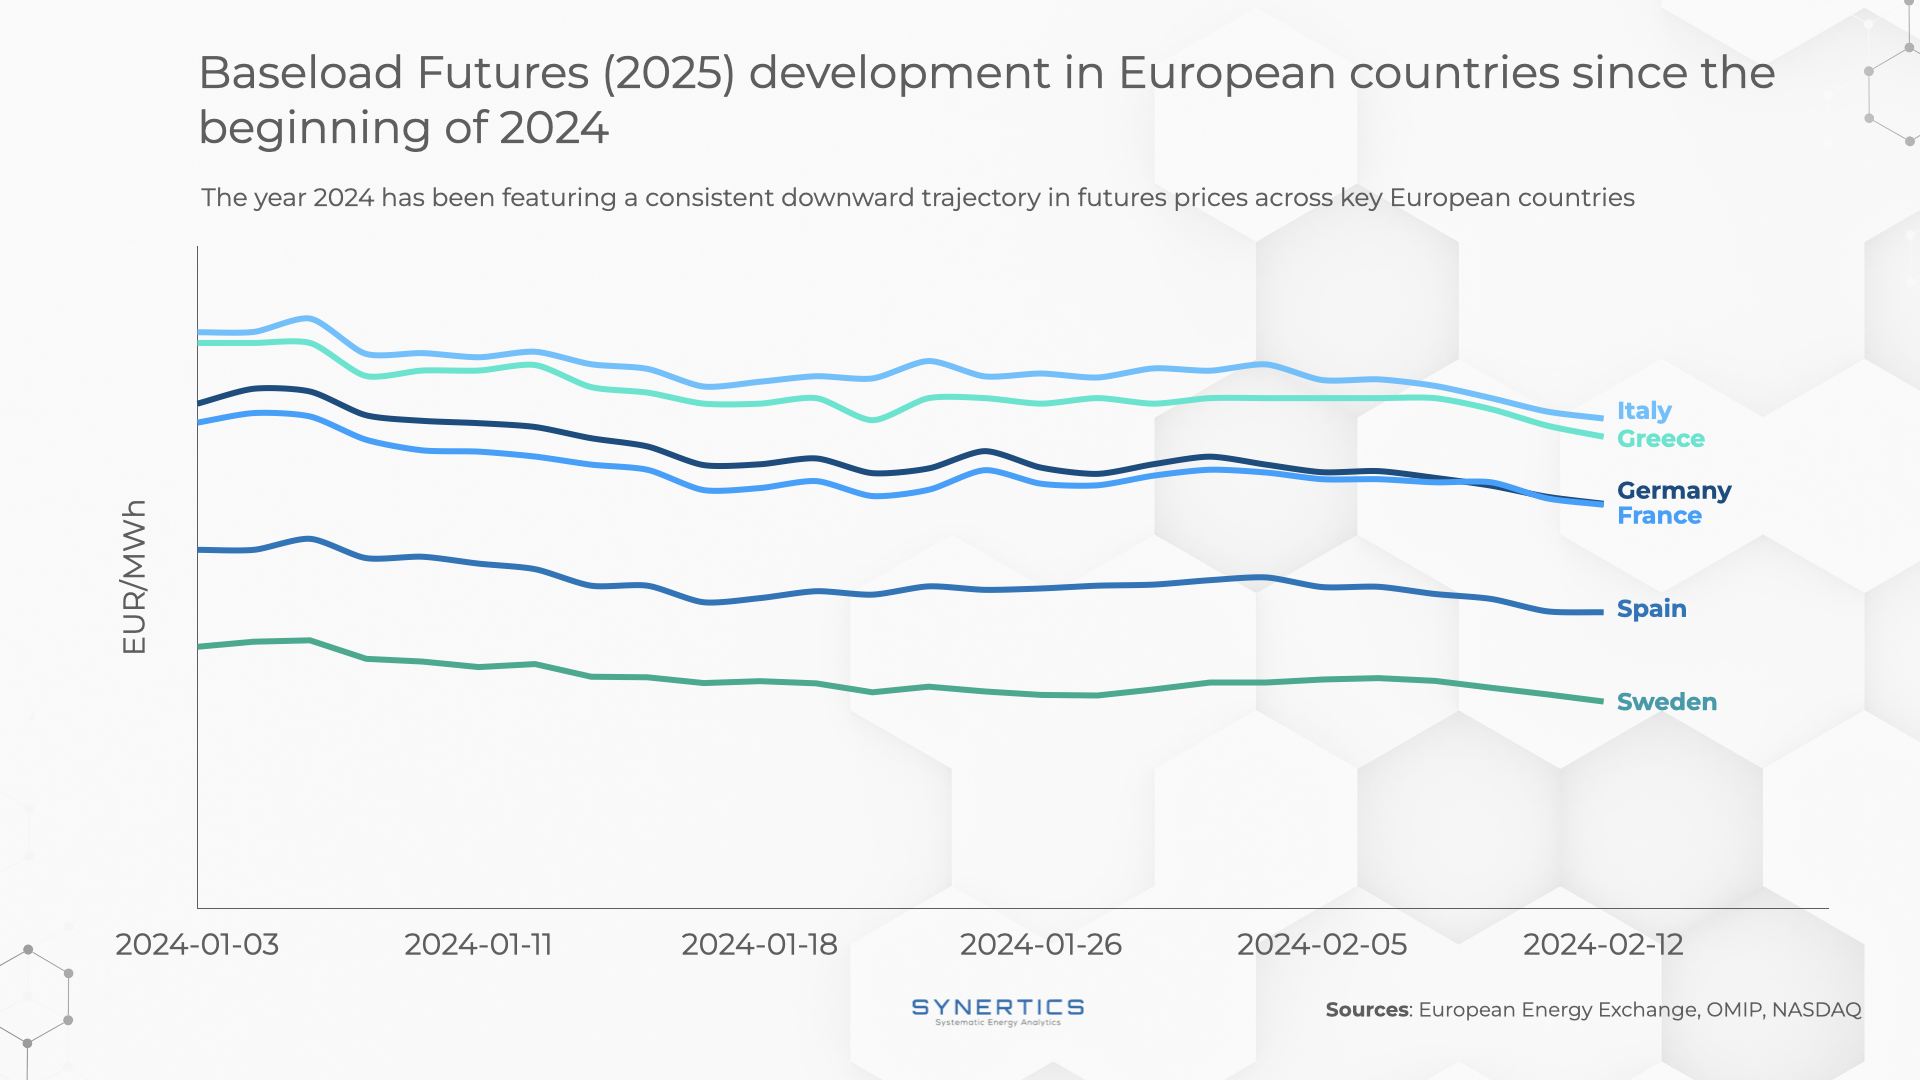 Baseload Futures (2025) in European countries Synertics